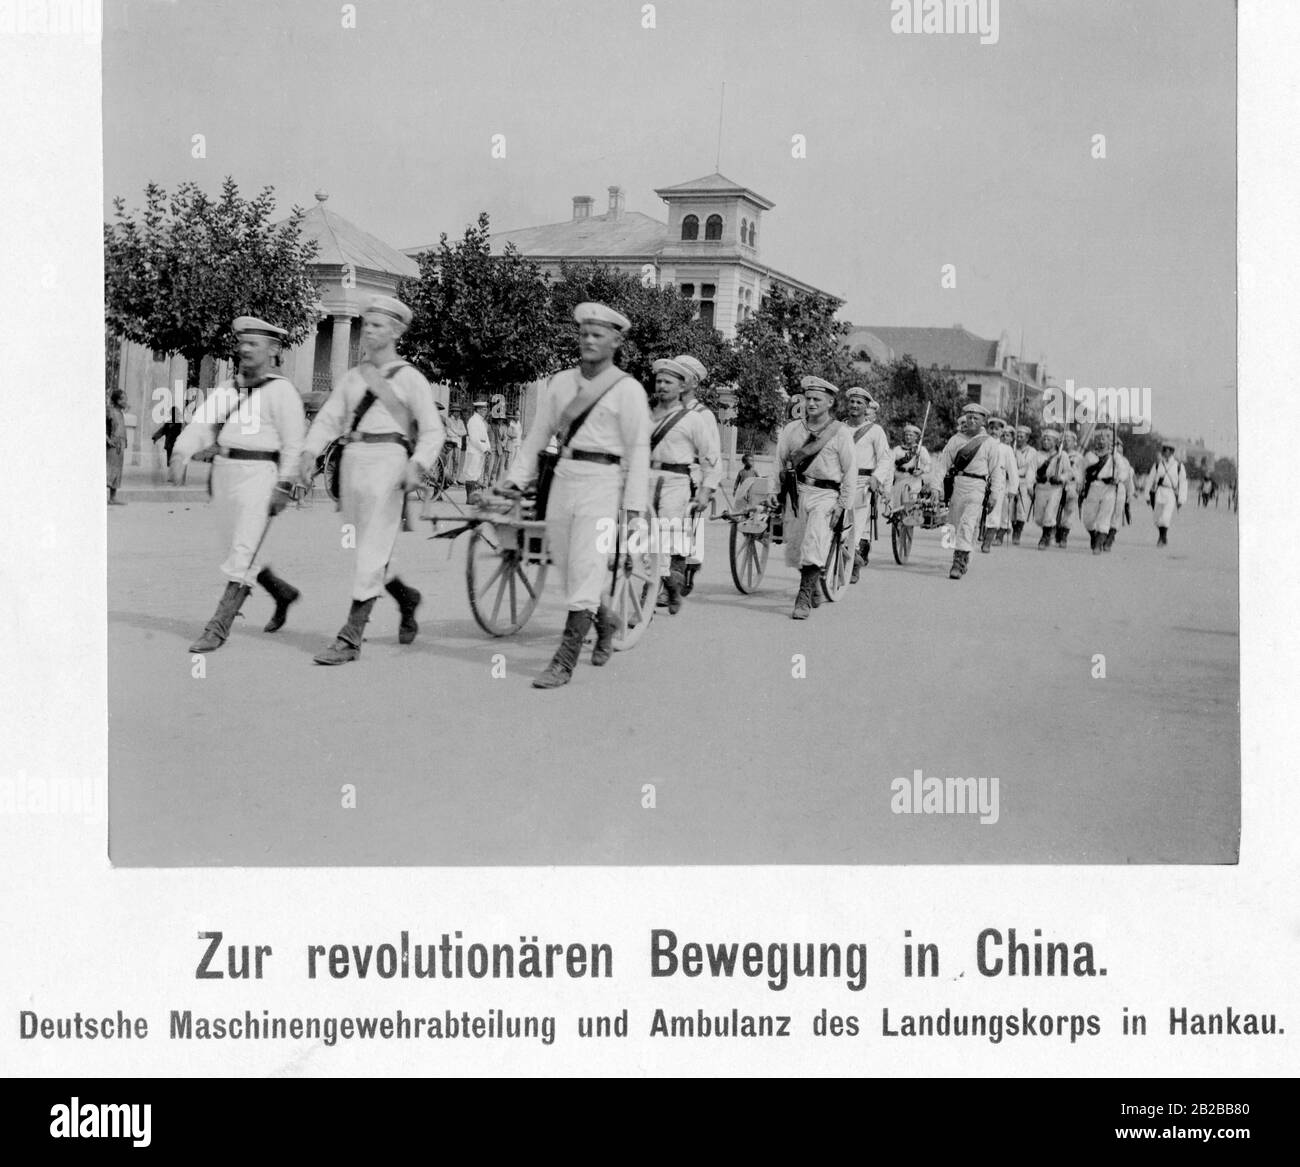 A German machine gun detachment and ambulance of the Landungskorps marches across a street in the German colony in Hankou in China, during the Chinese Revolution. Stock Photo